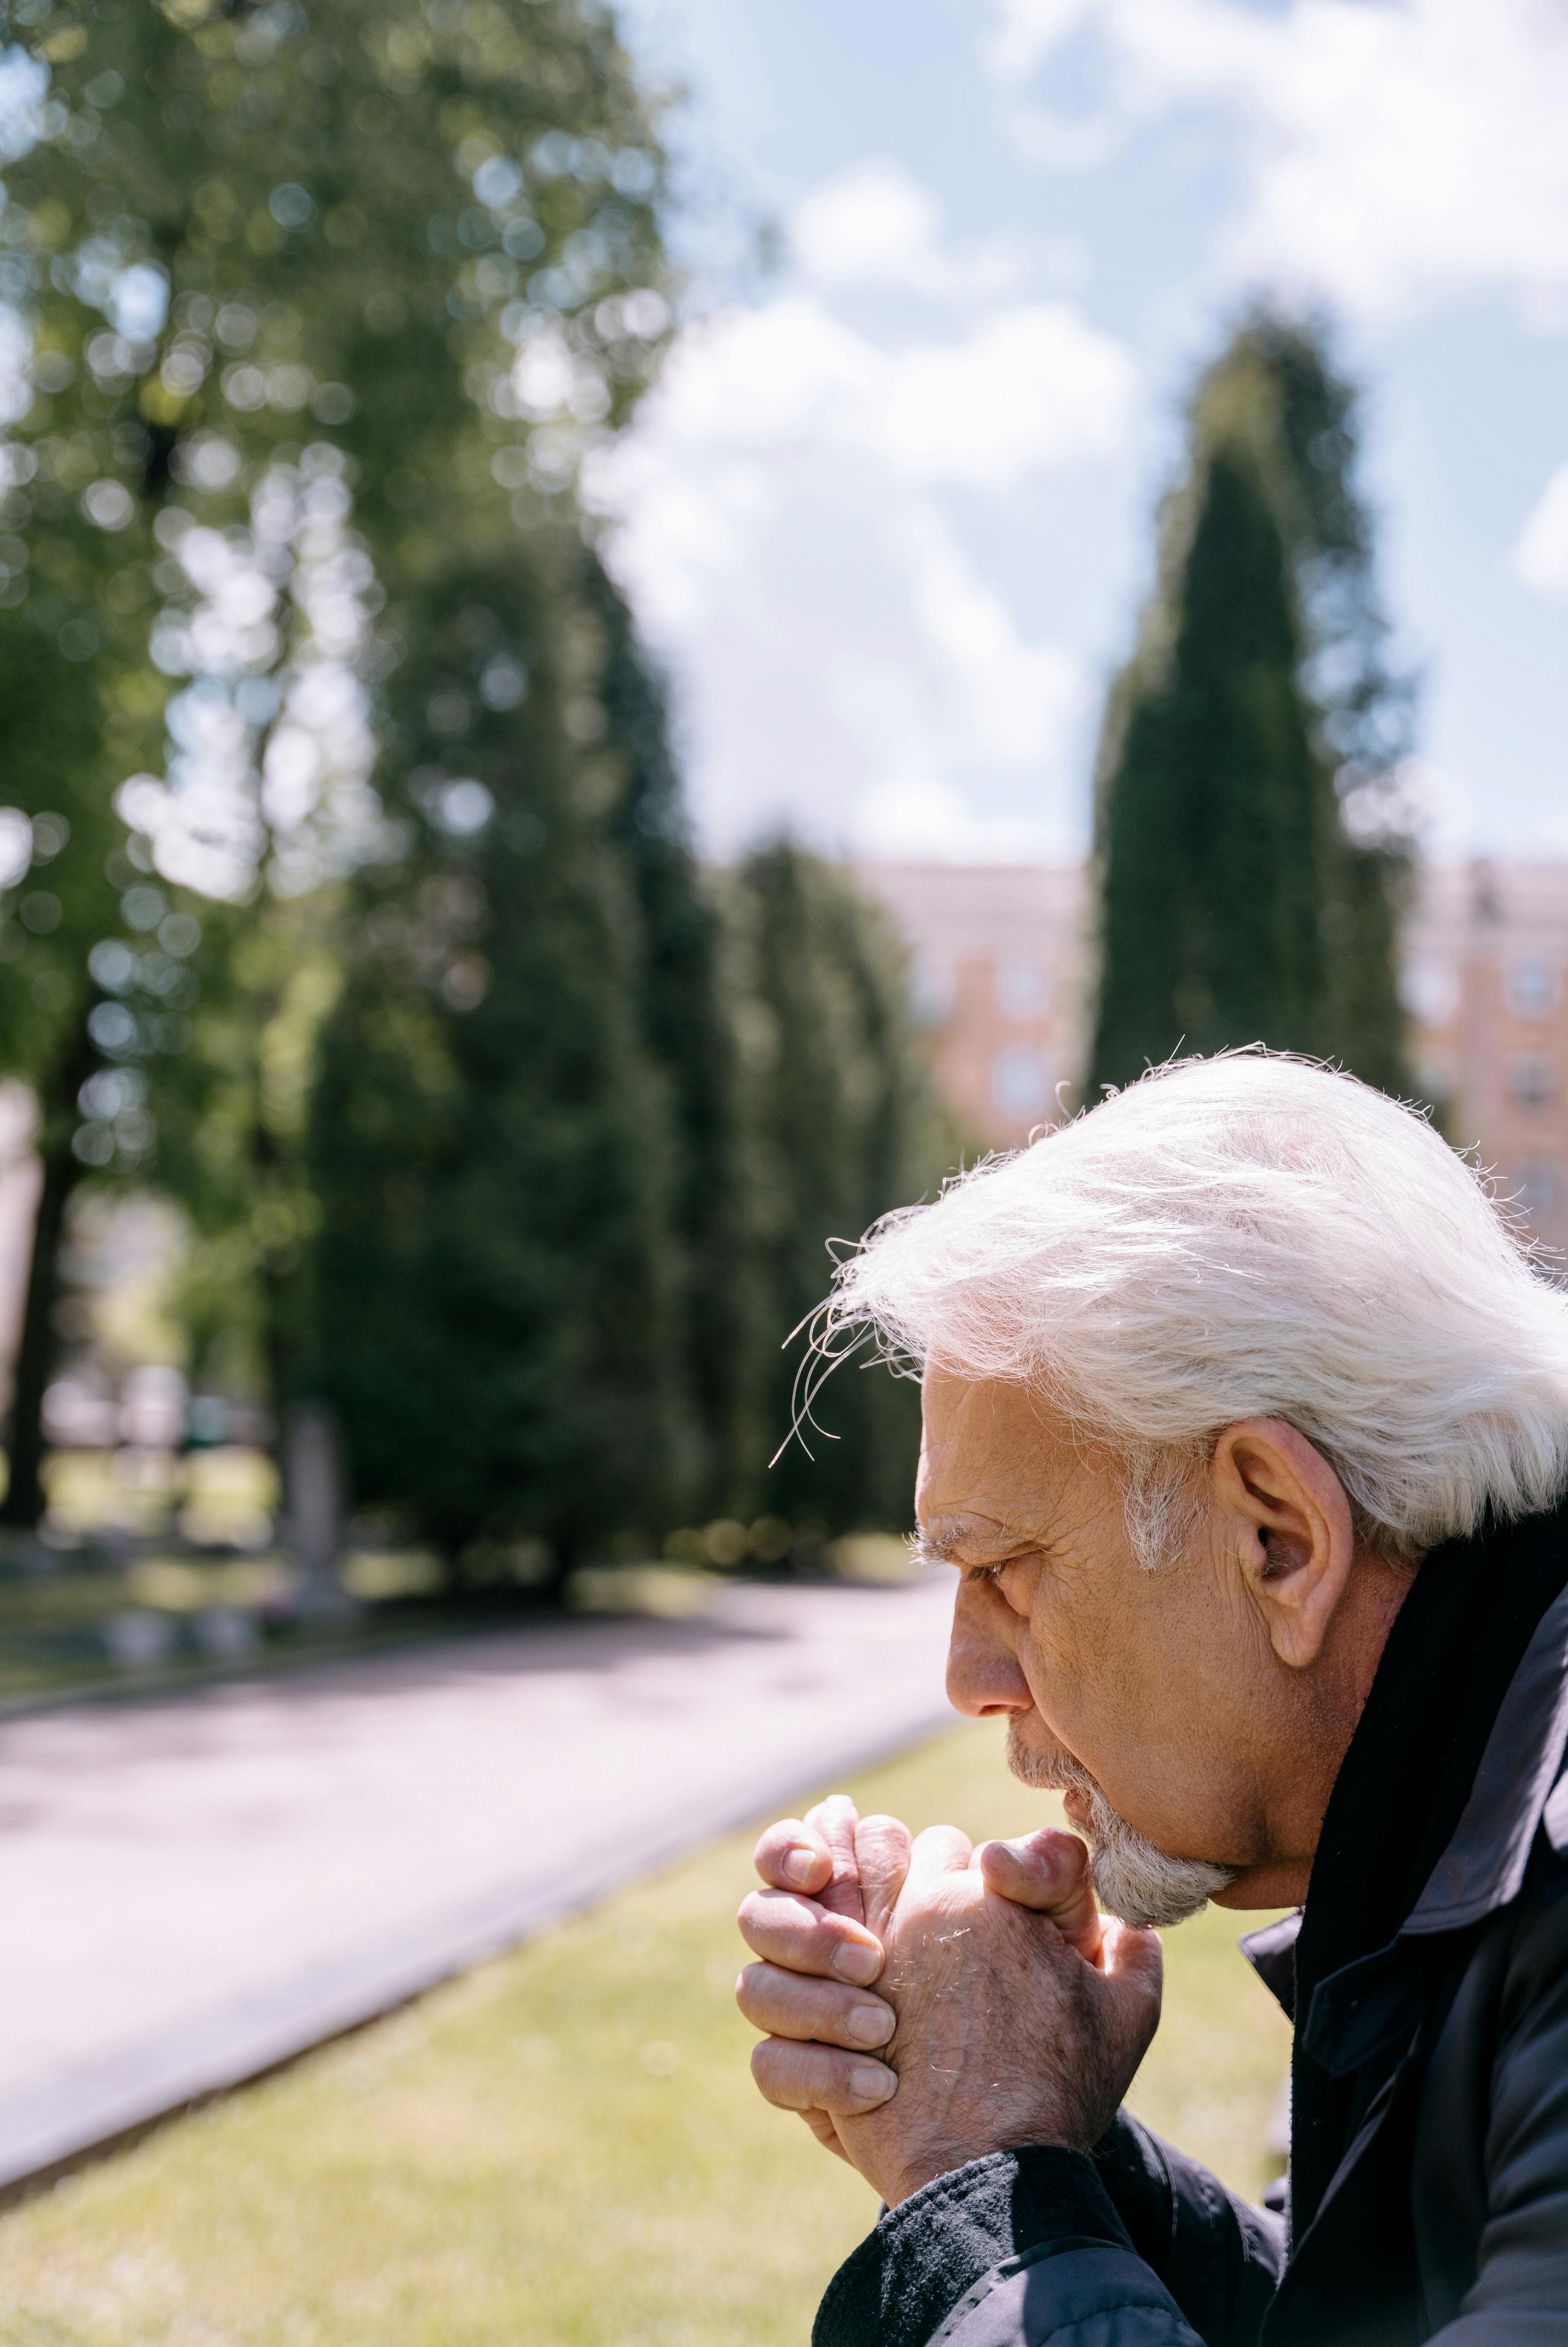 A sad man sitting on a bench. For illustration purposes only | Source: Pexels